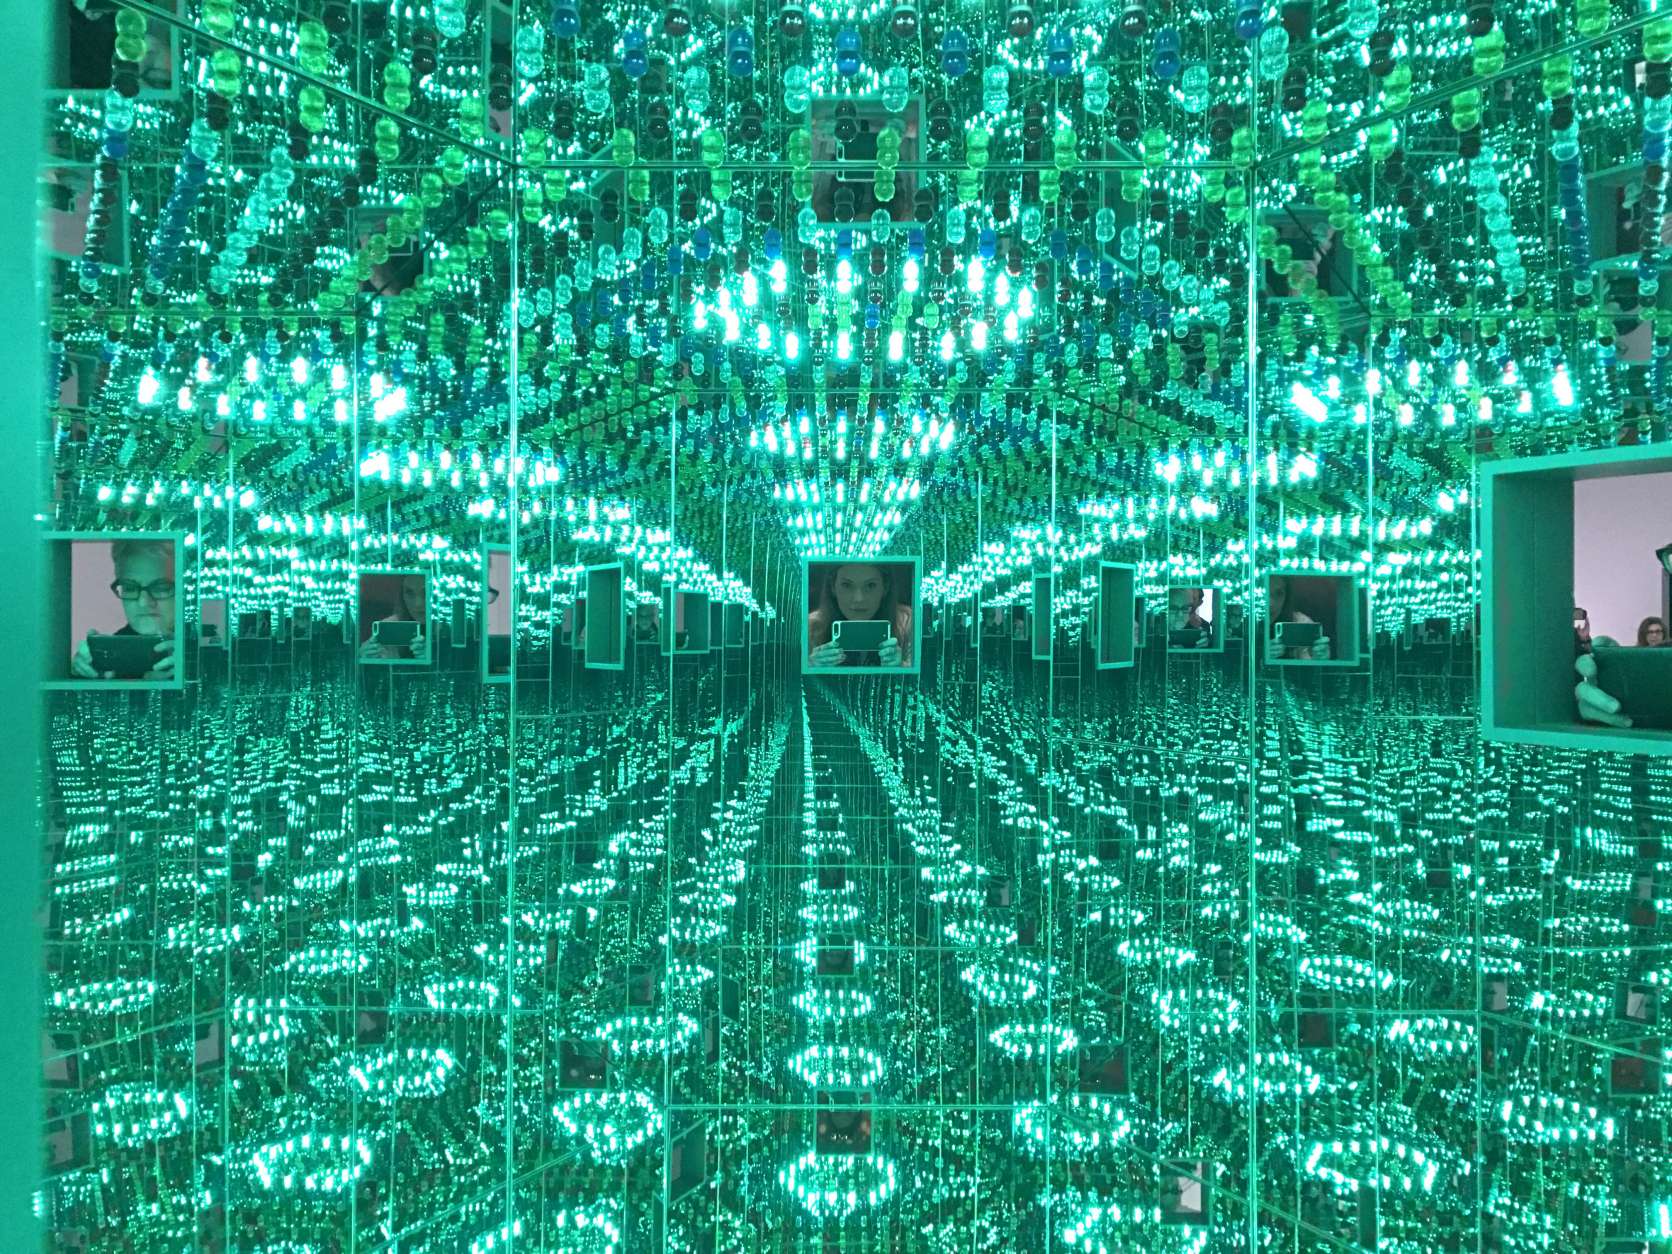 Inside the Inifinity Mirrored Room, Love Forever. There are two installations in this set, one created in 1965 and the other in 1994. (WTOP/Megan Cloherty)